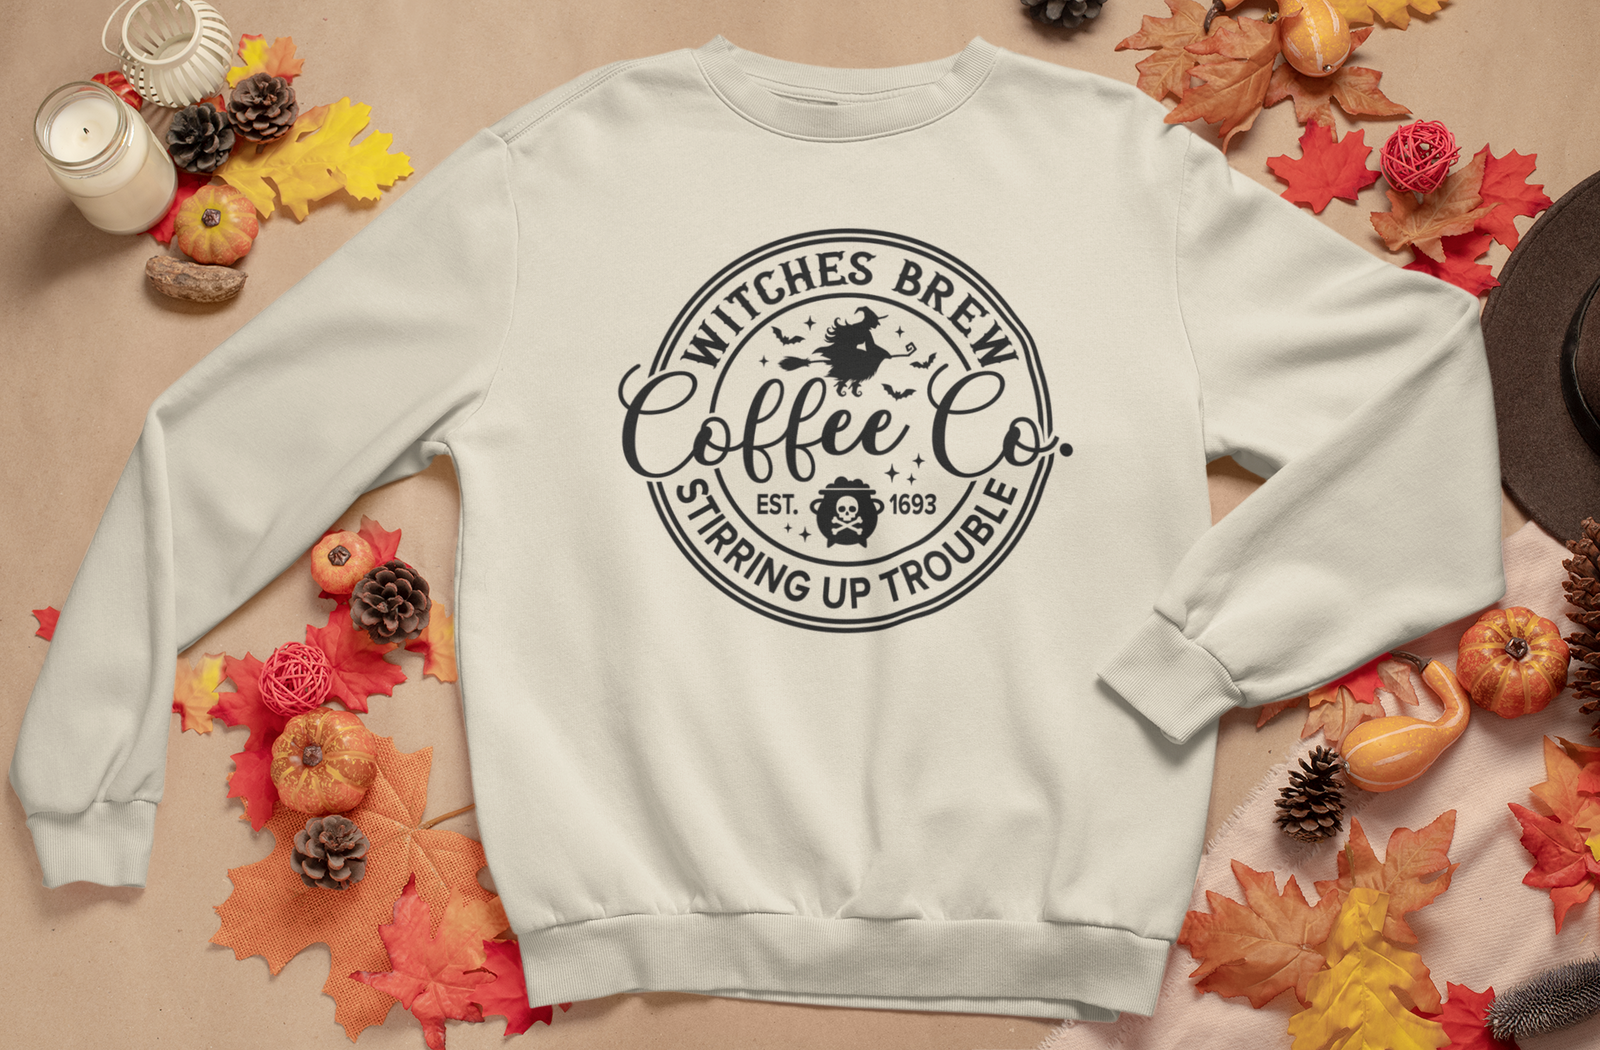 Fall Sweatshirts: The Ultimate Guide to Cozy Fashion